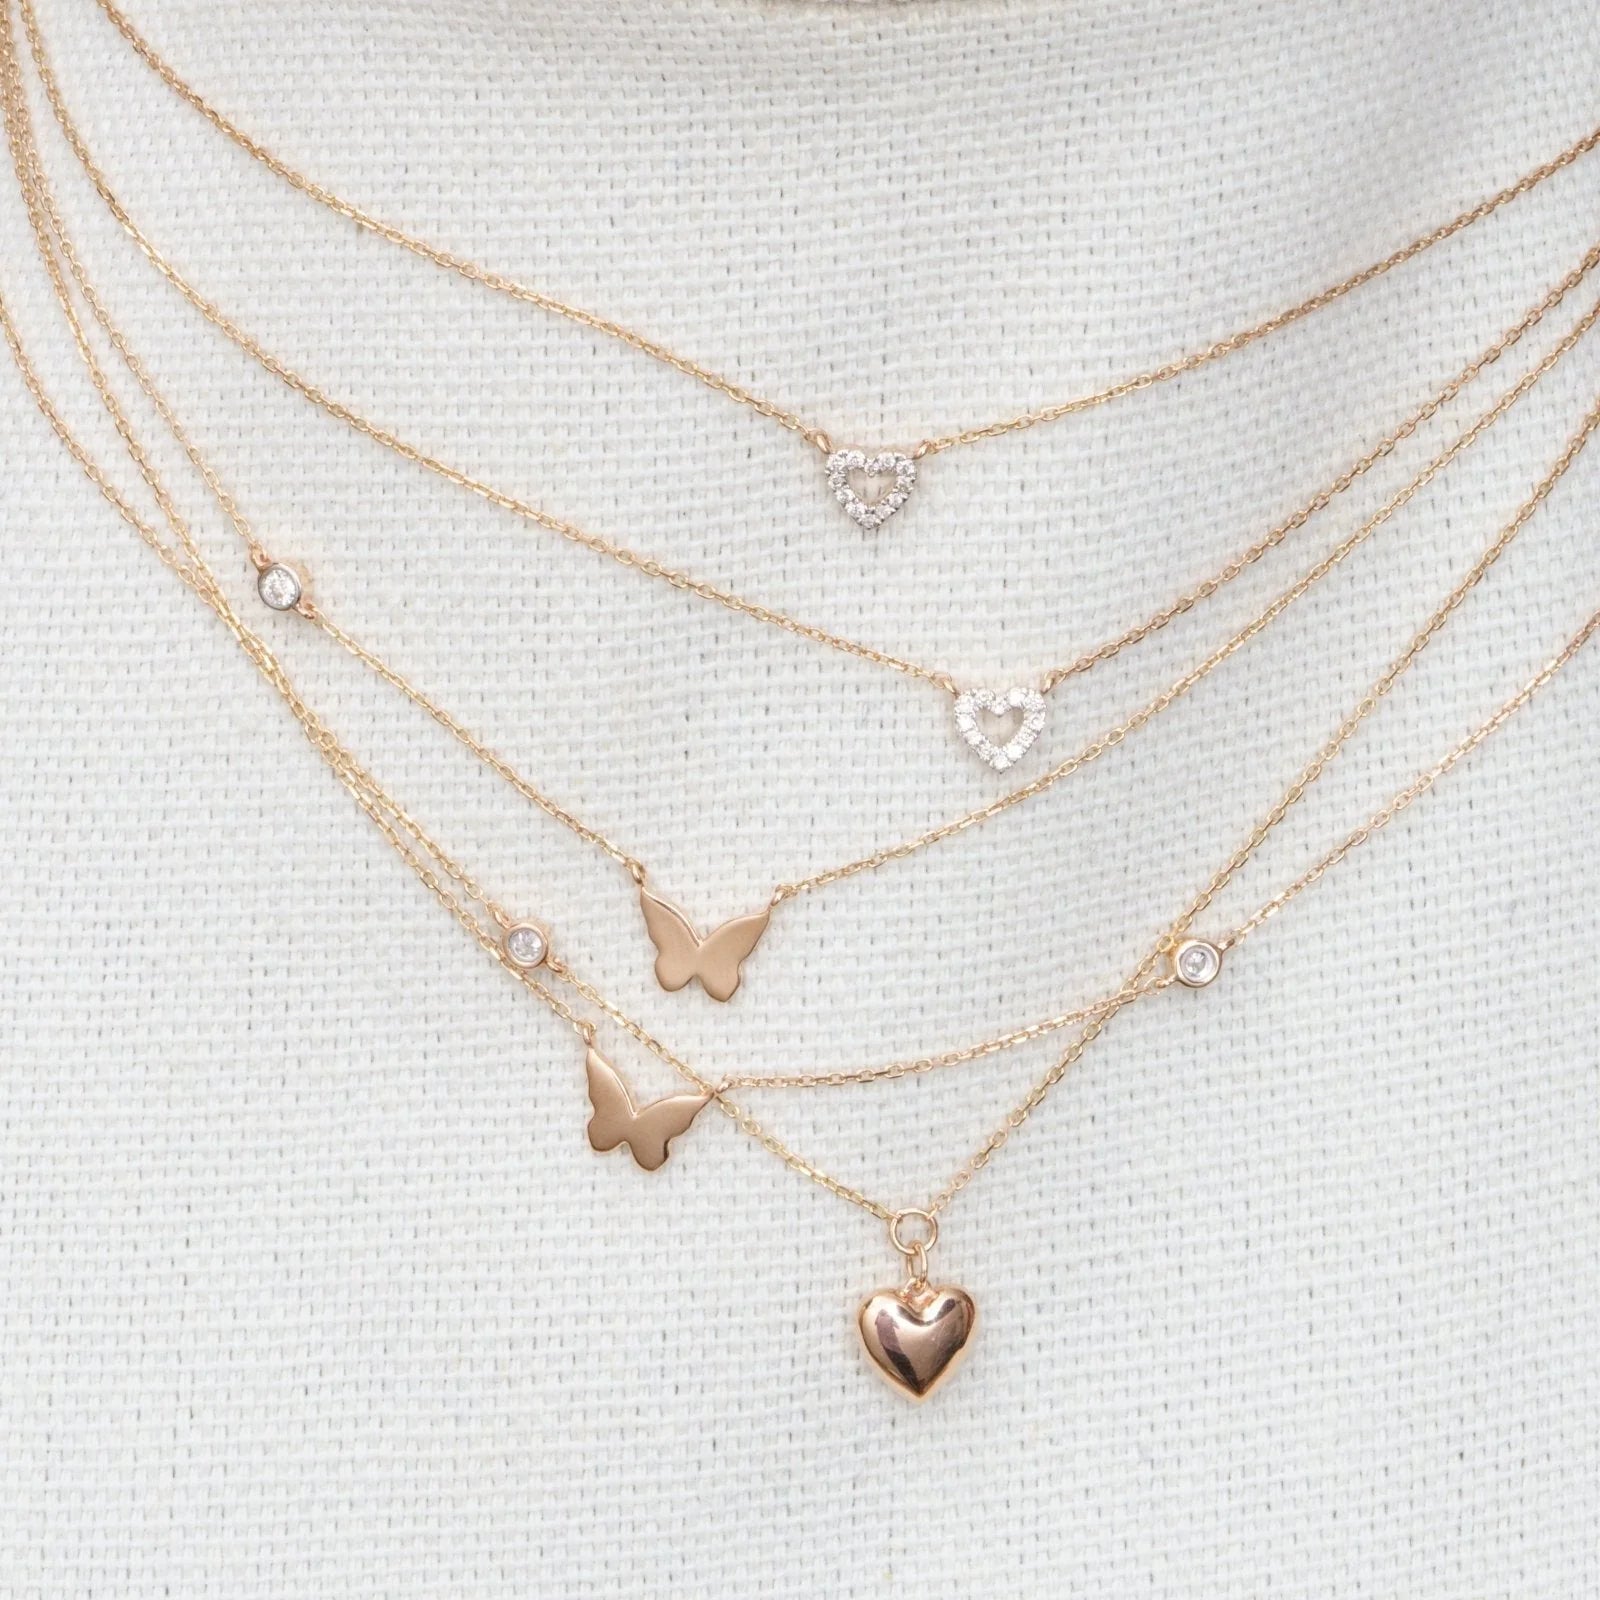 five simple rose gold necklaces layered together